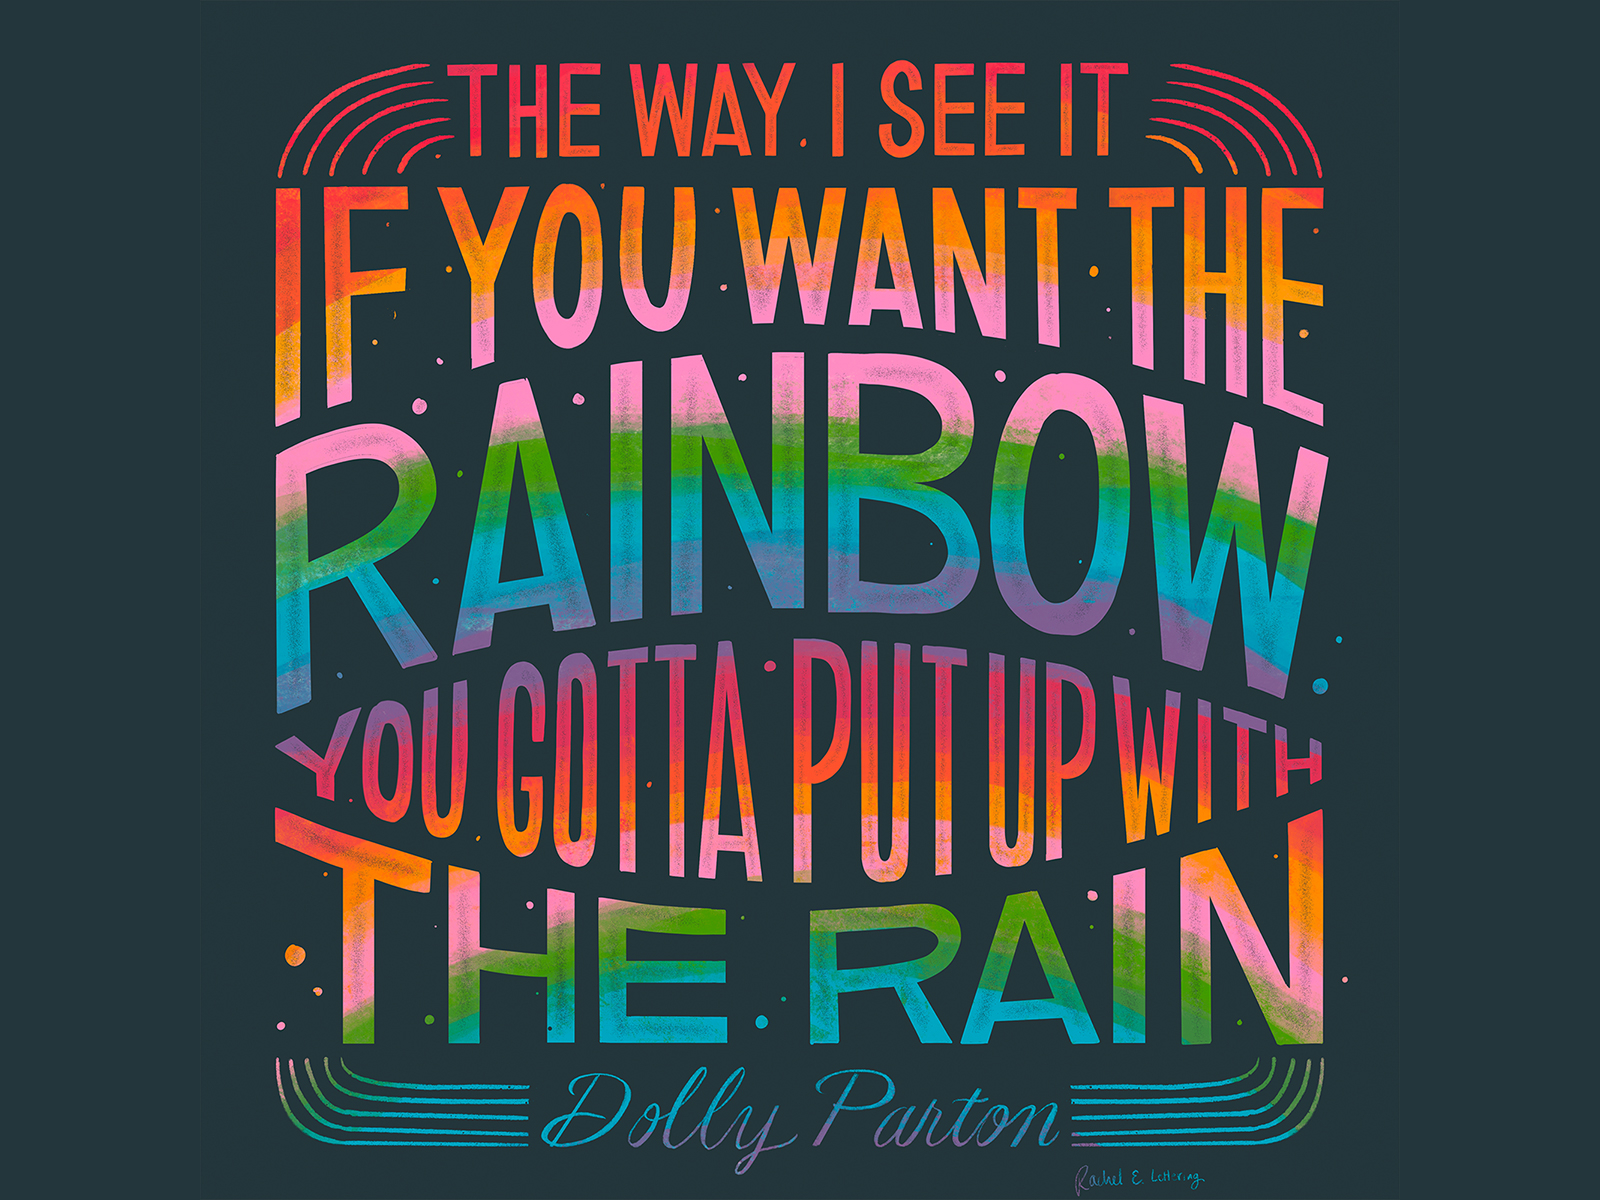 Dolly Parton Rainbow Quote By Rachel Eck On Dribbble